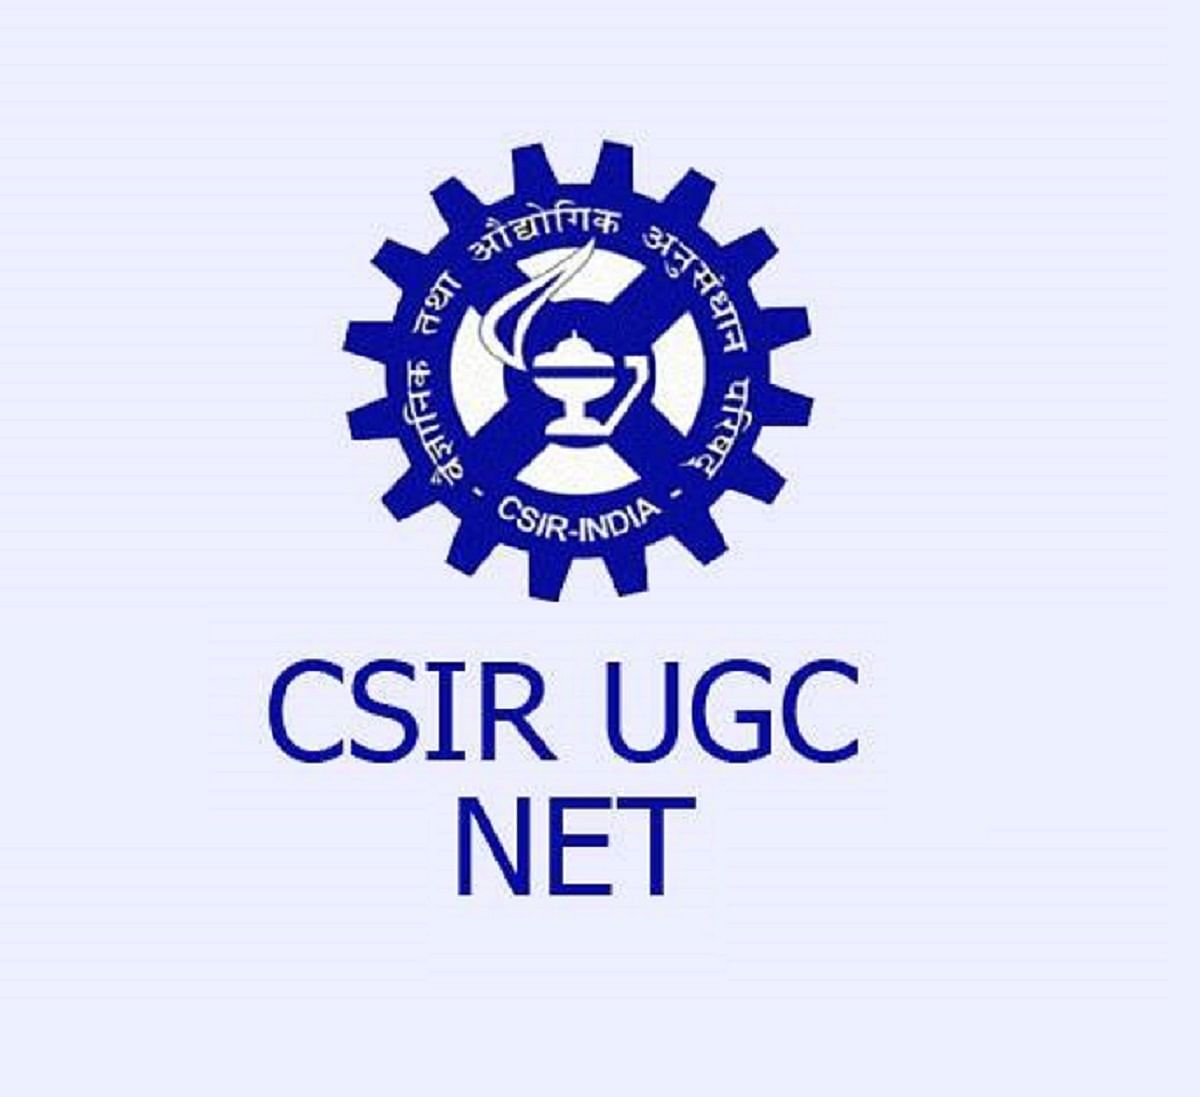 CSIR UGC NET December 2019: Application Process to Conclude in 4 Days, Check Details Here